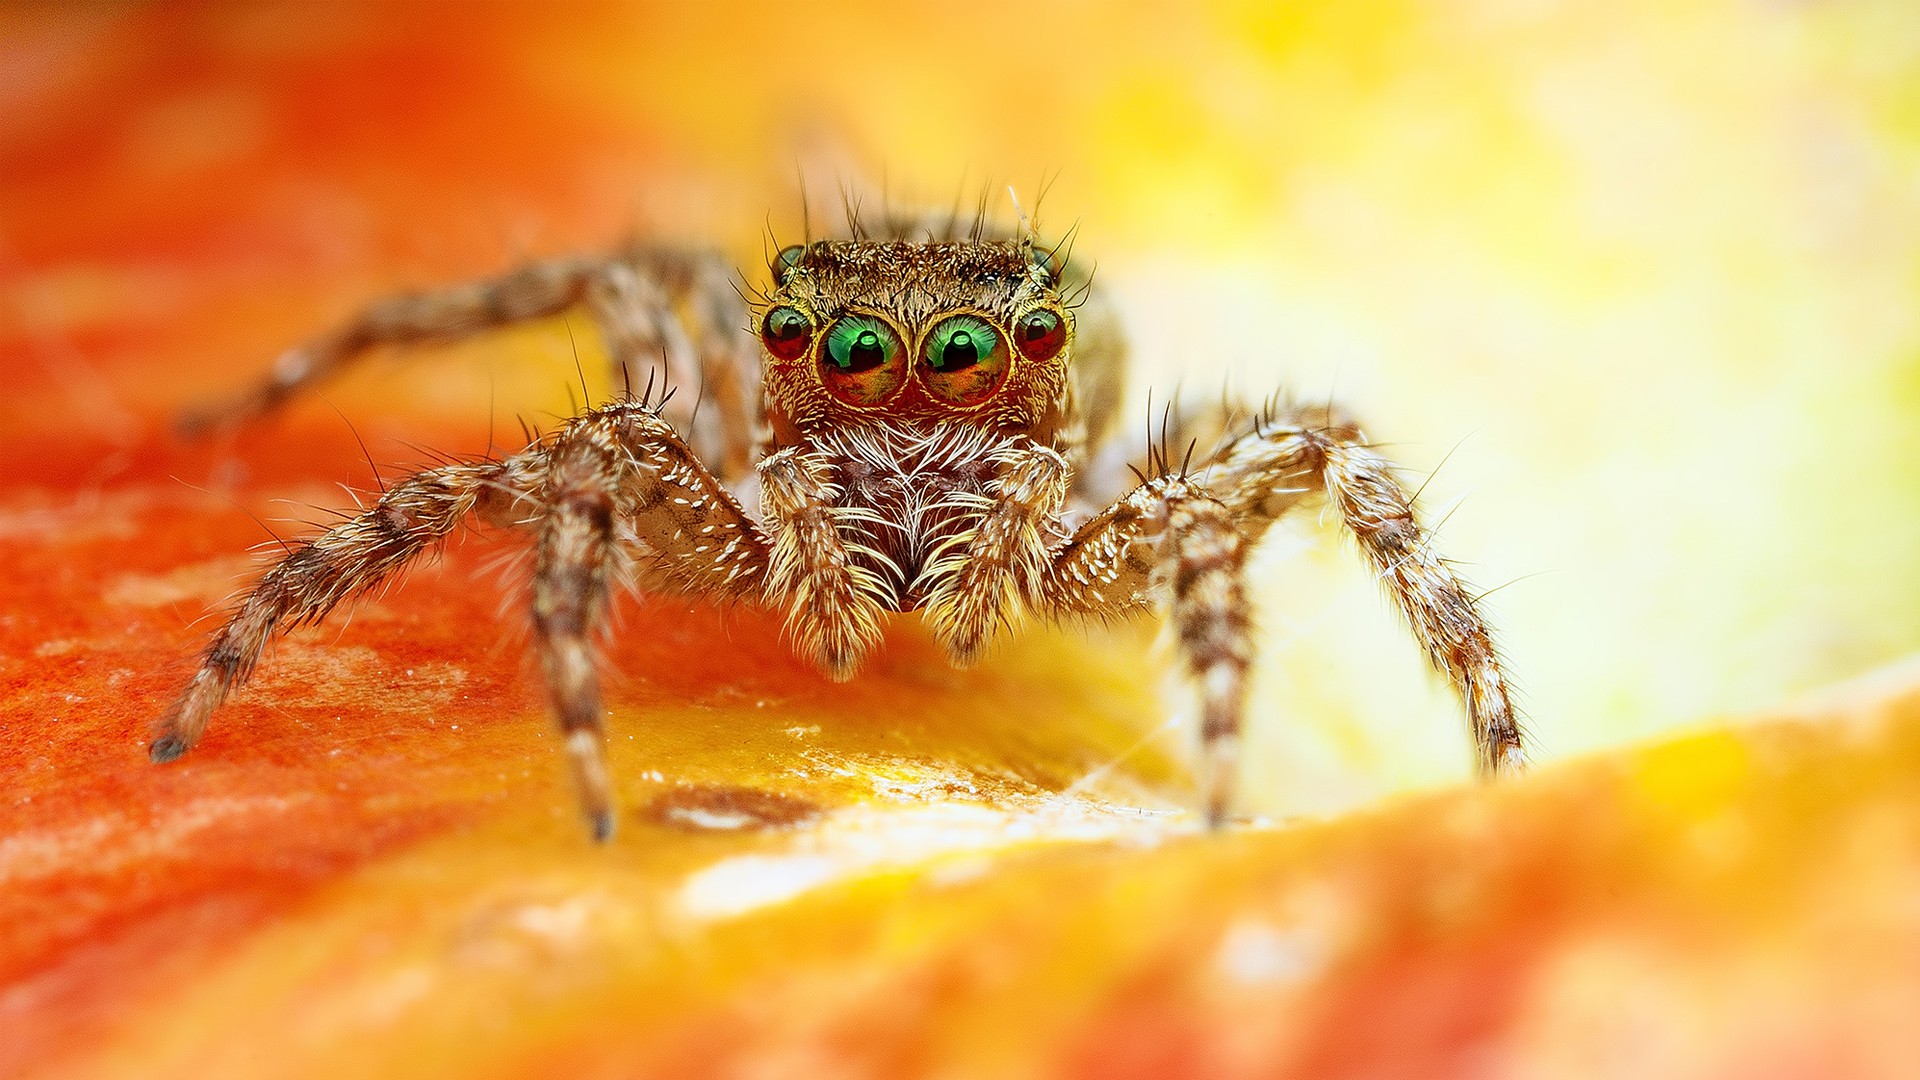 spider wallpaper,macro photography,spider,insect,close up,eye